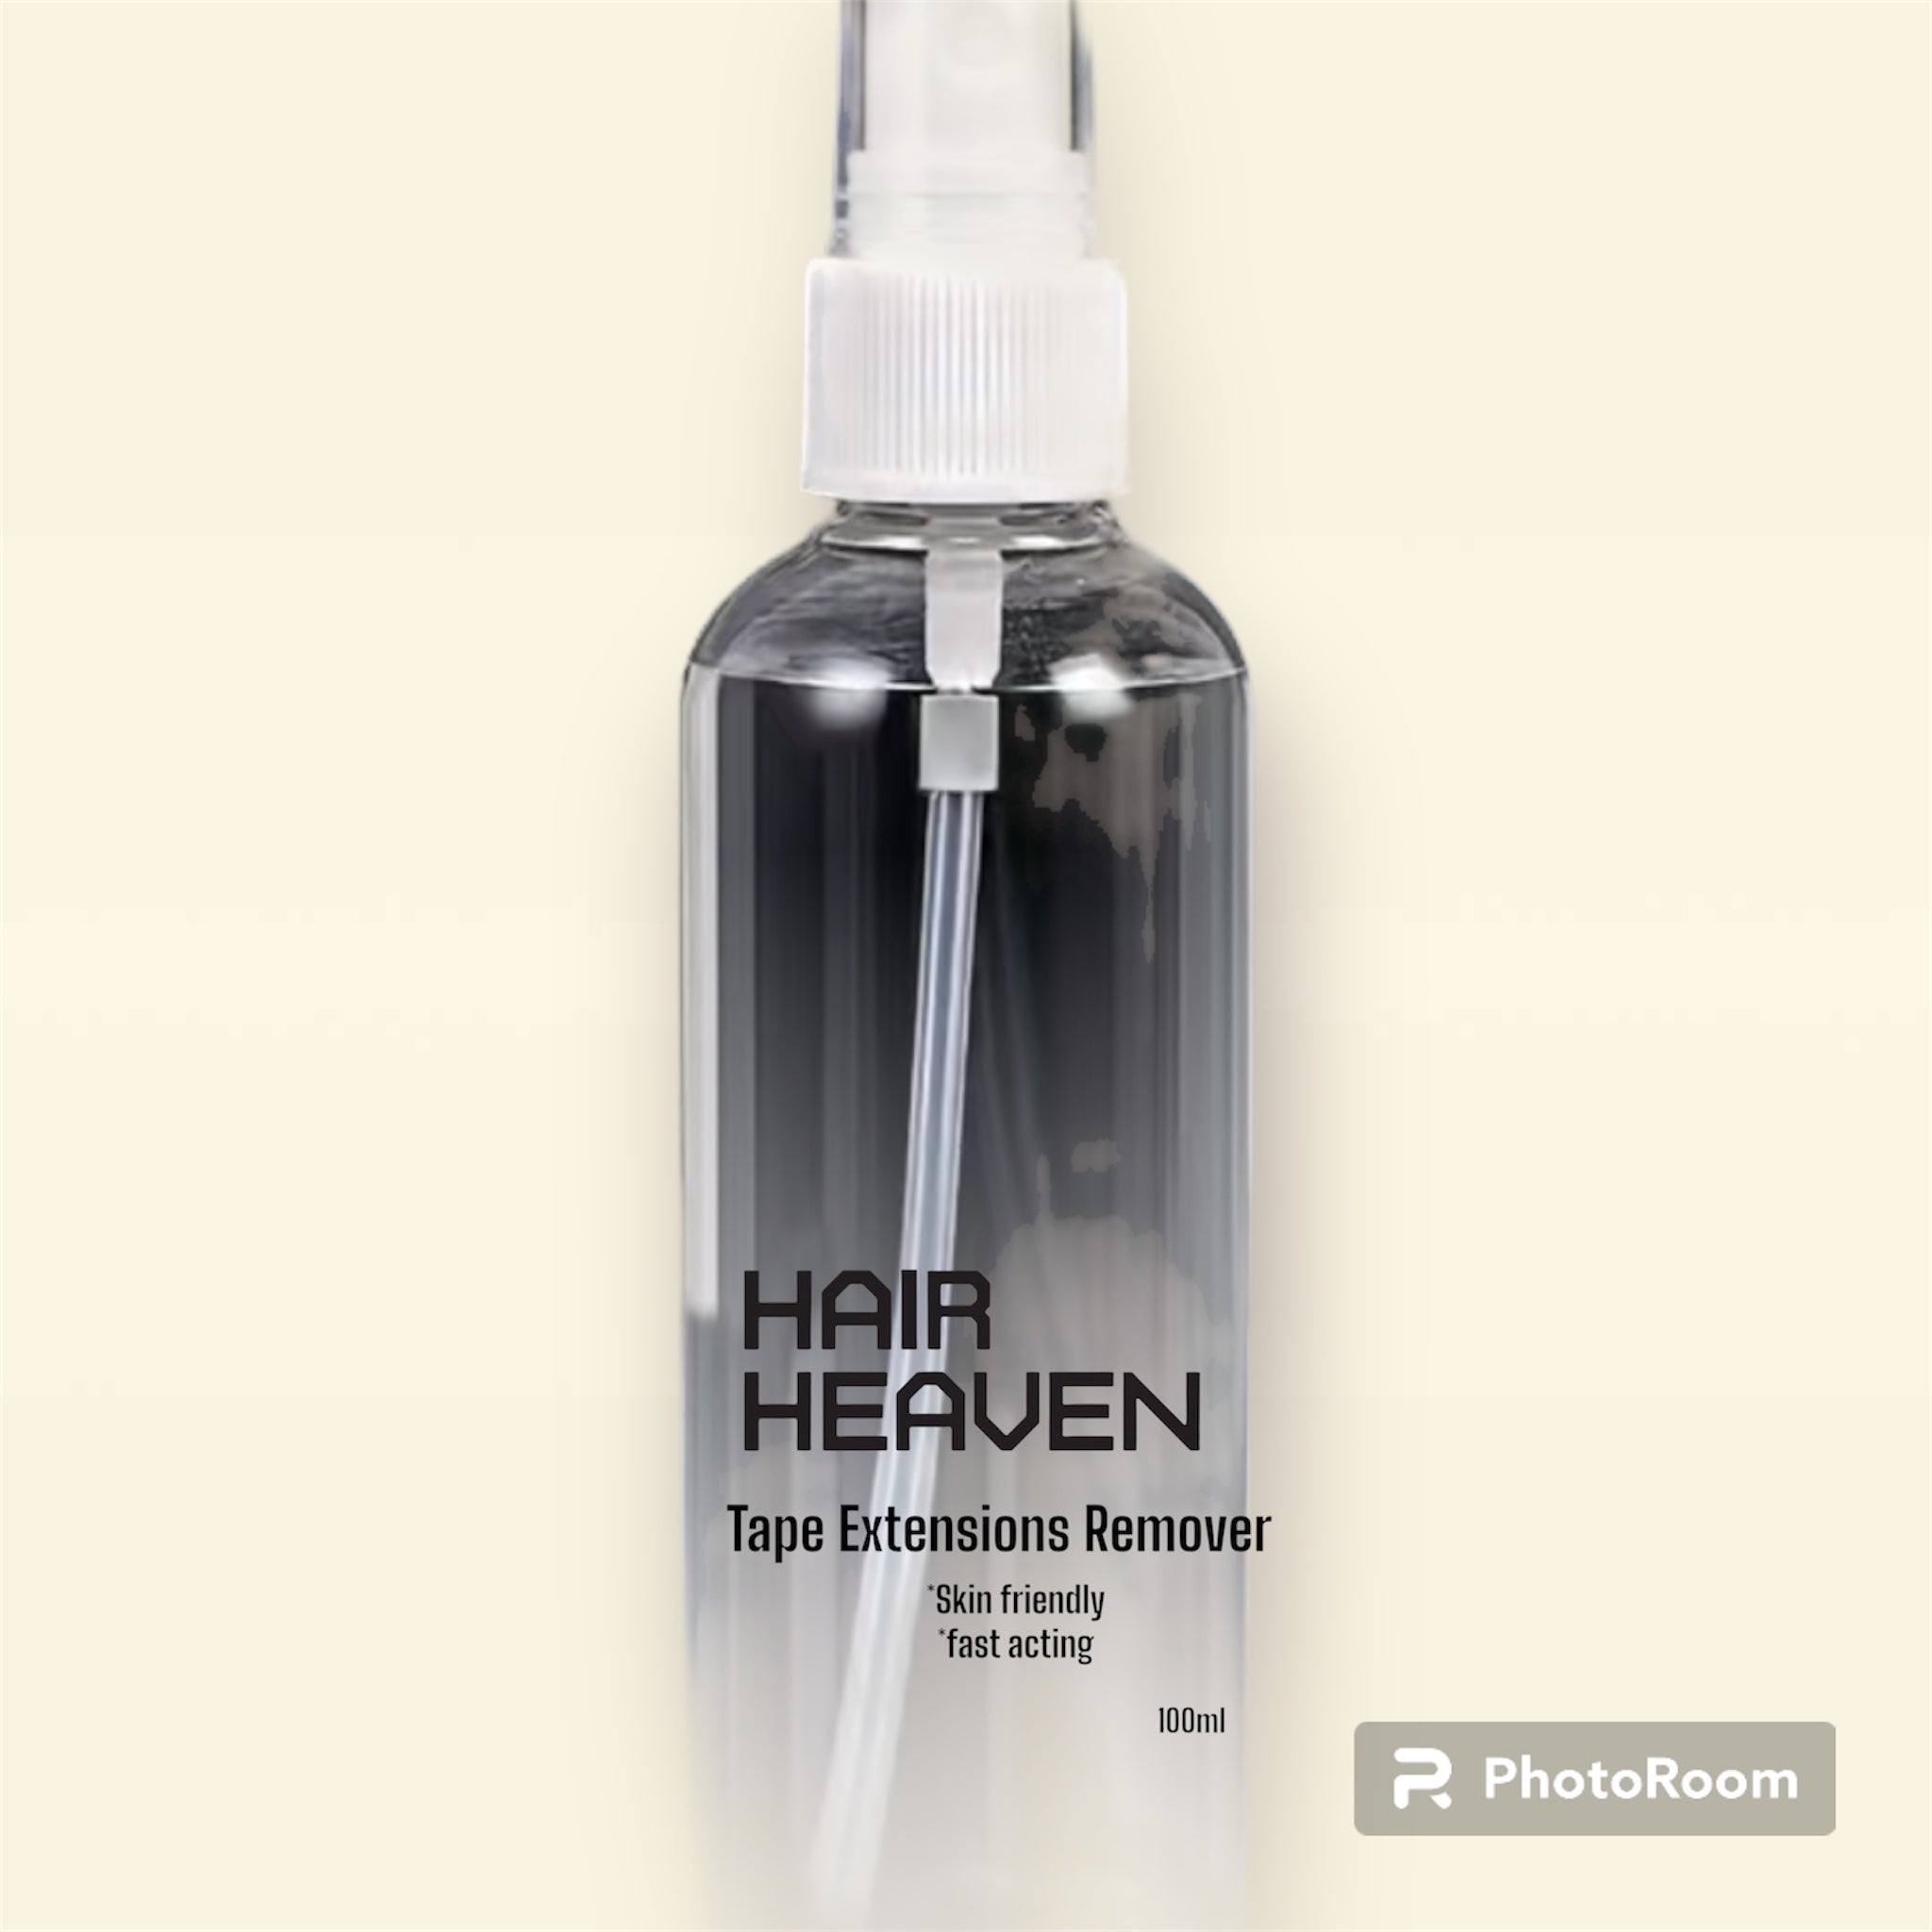 Hair Heaven Tape Extensions Remover 100ml